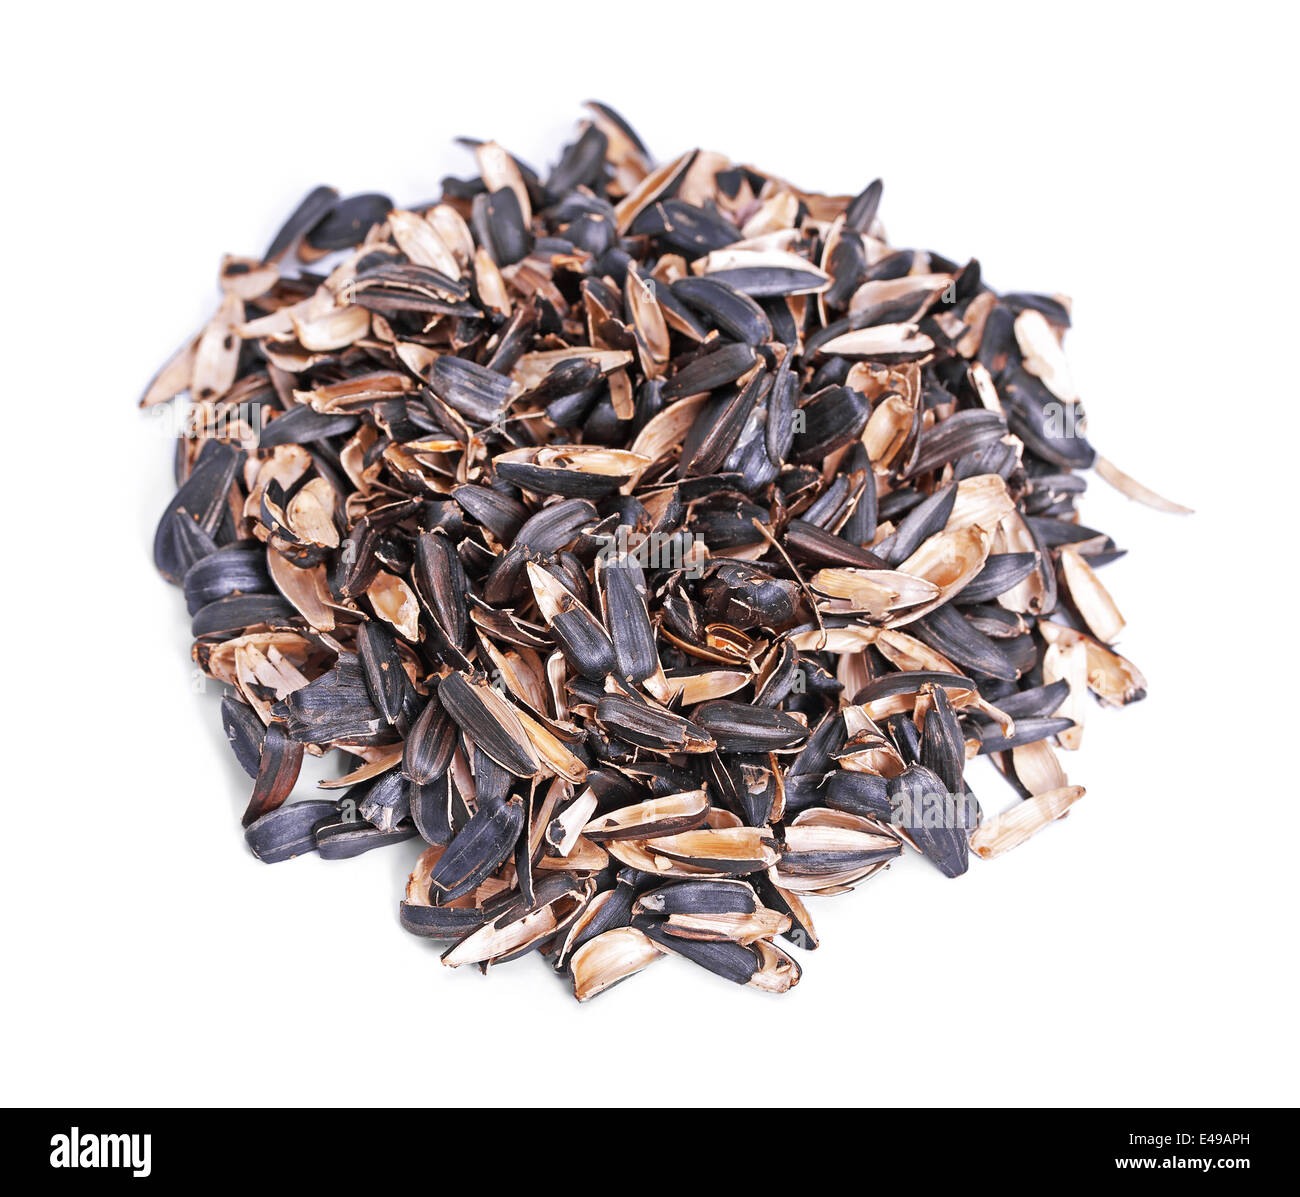 Waste from seeds on a white background isolation Stock Photo